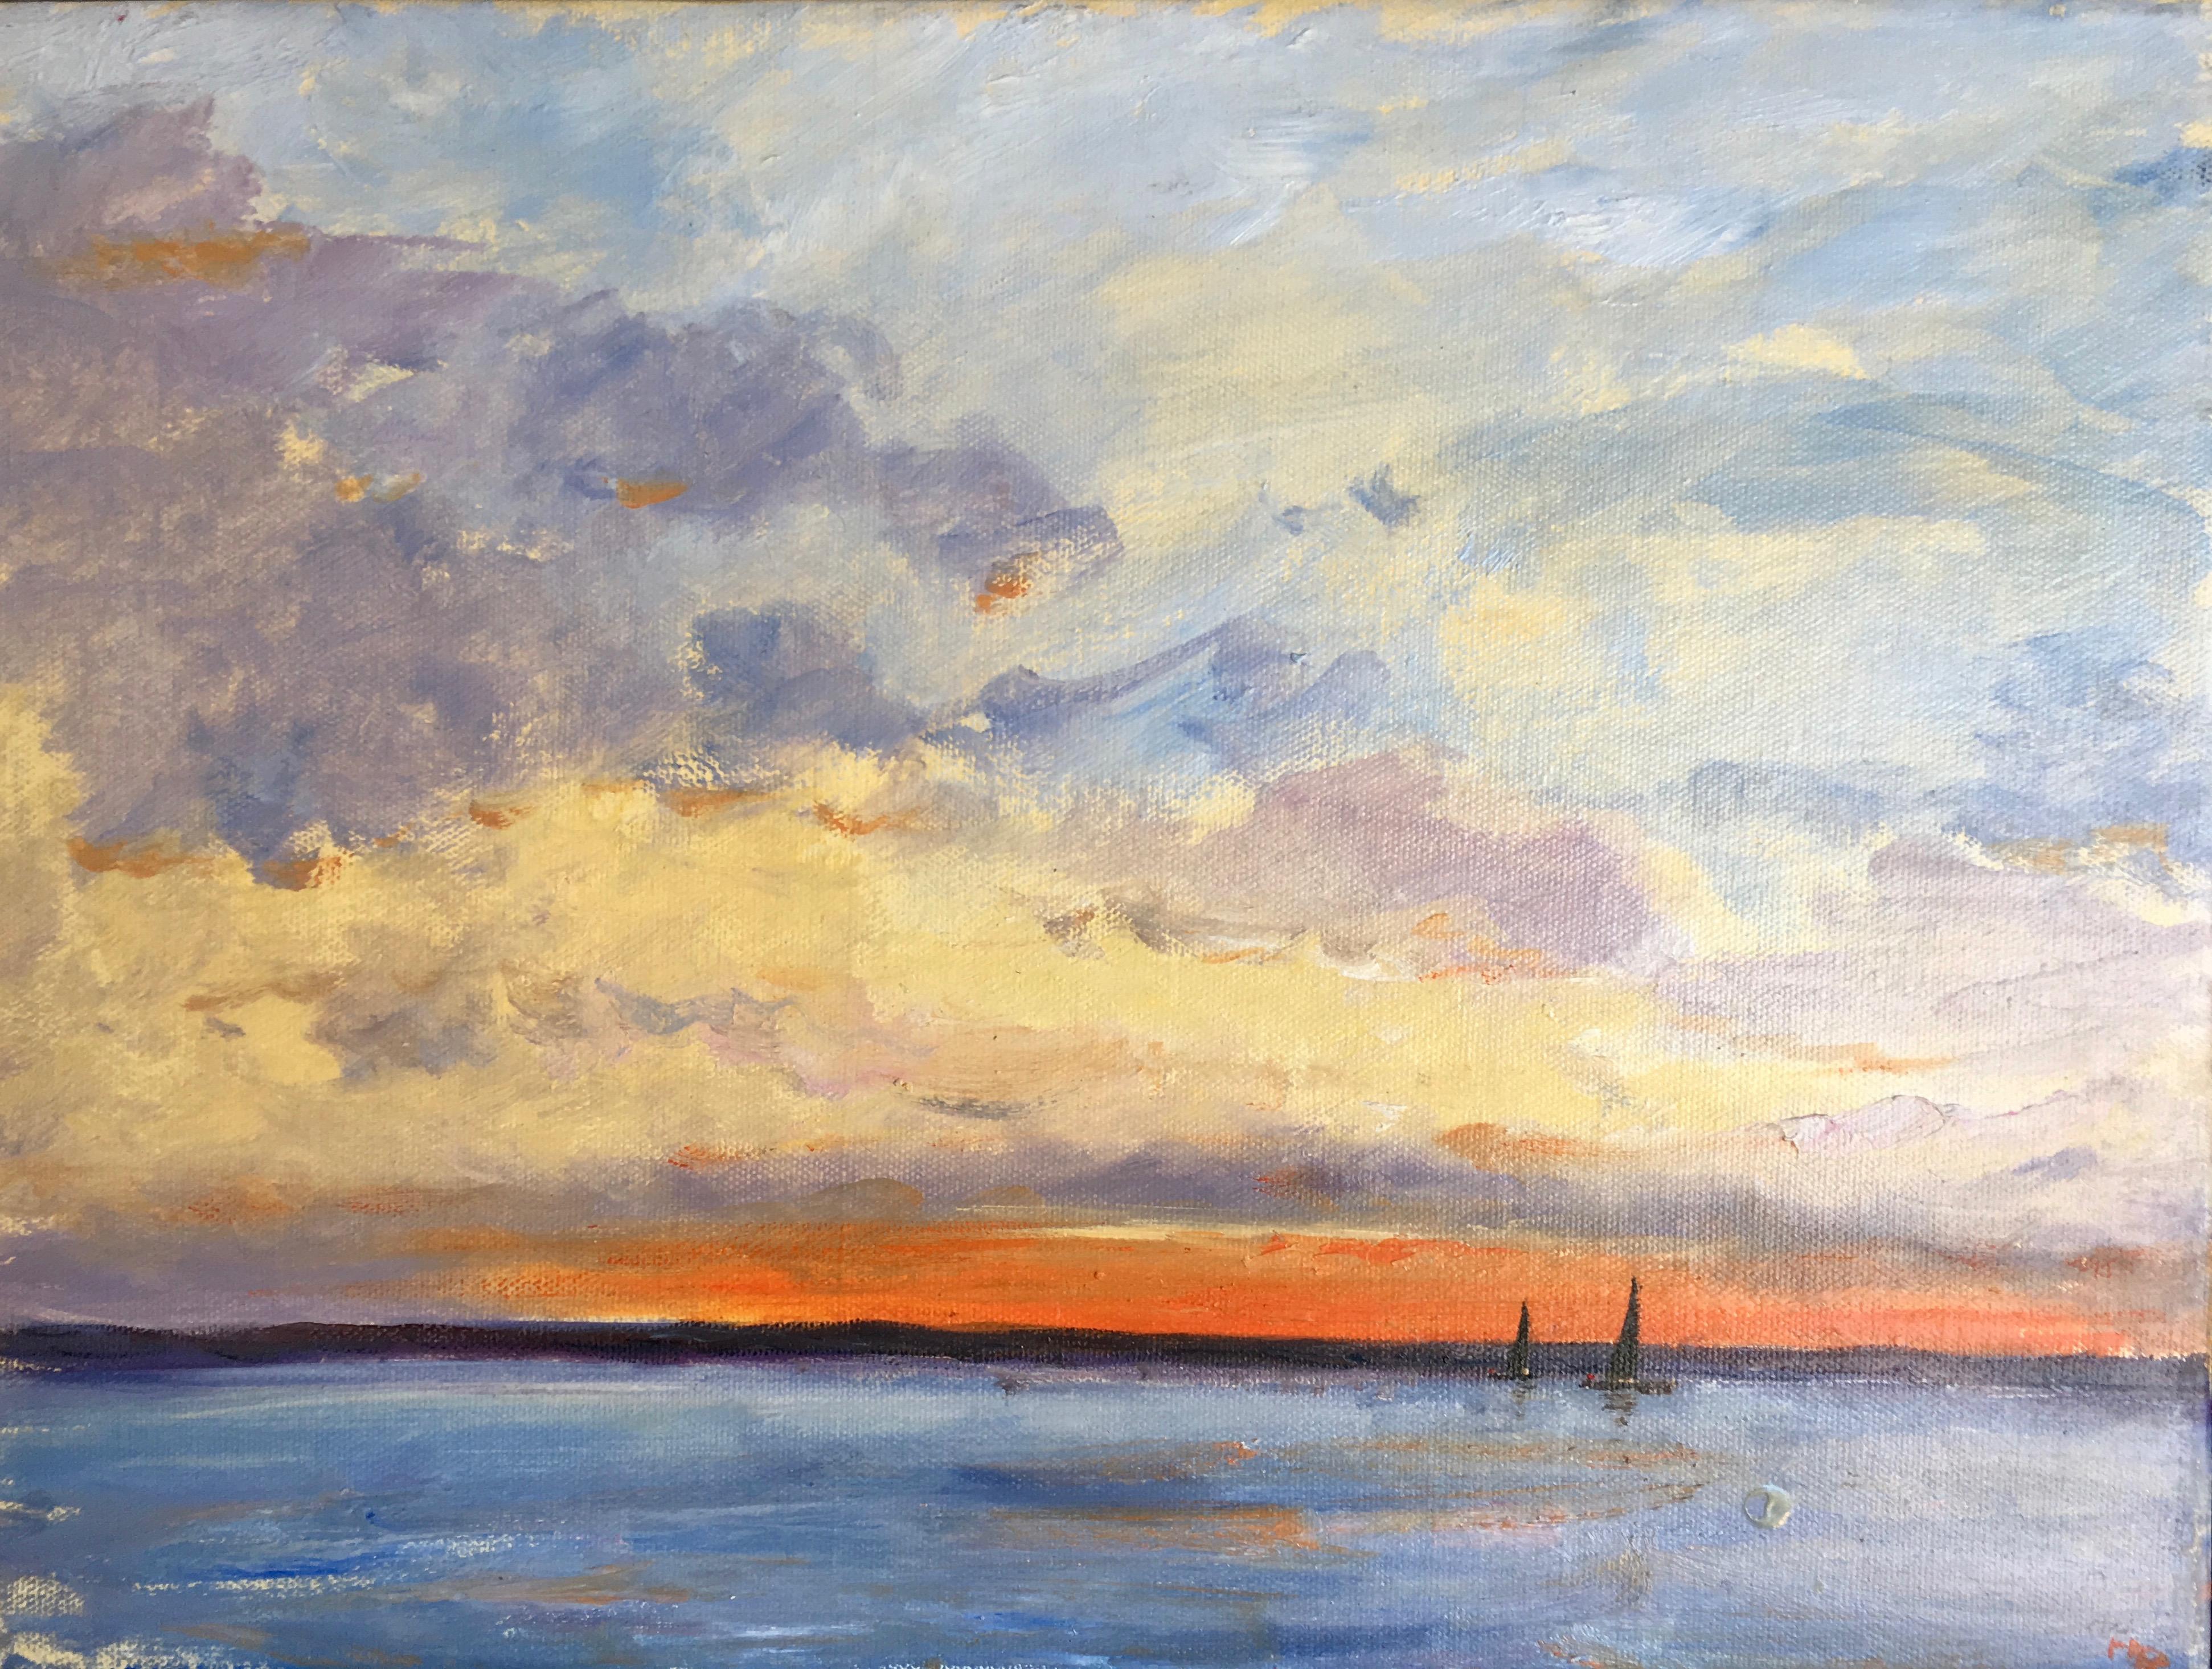 Setting Sun over the Ocean off the coast of Nantucket, USA with yachts  - Painting by Charles Bertie Hall